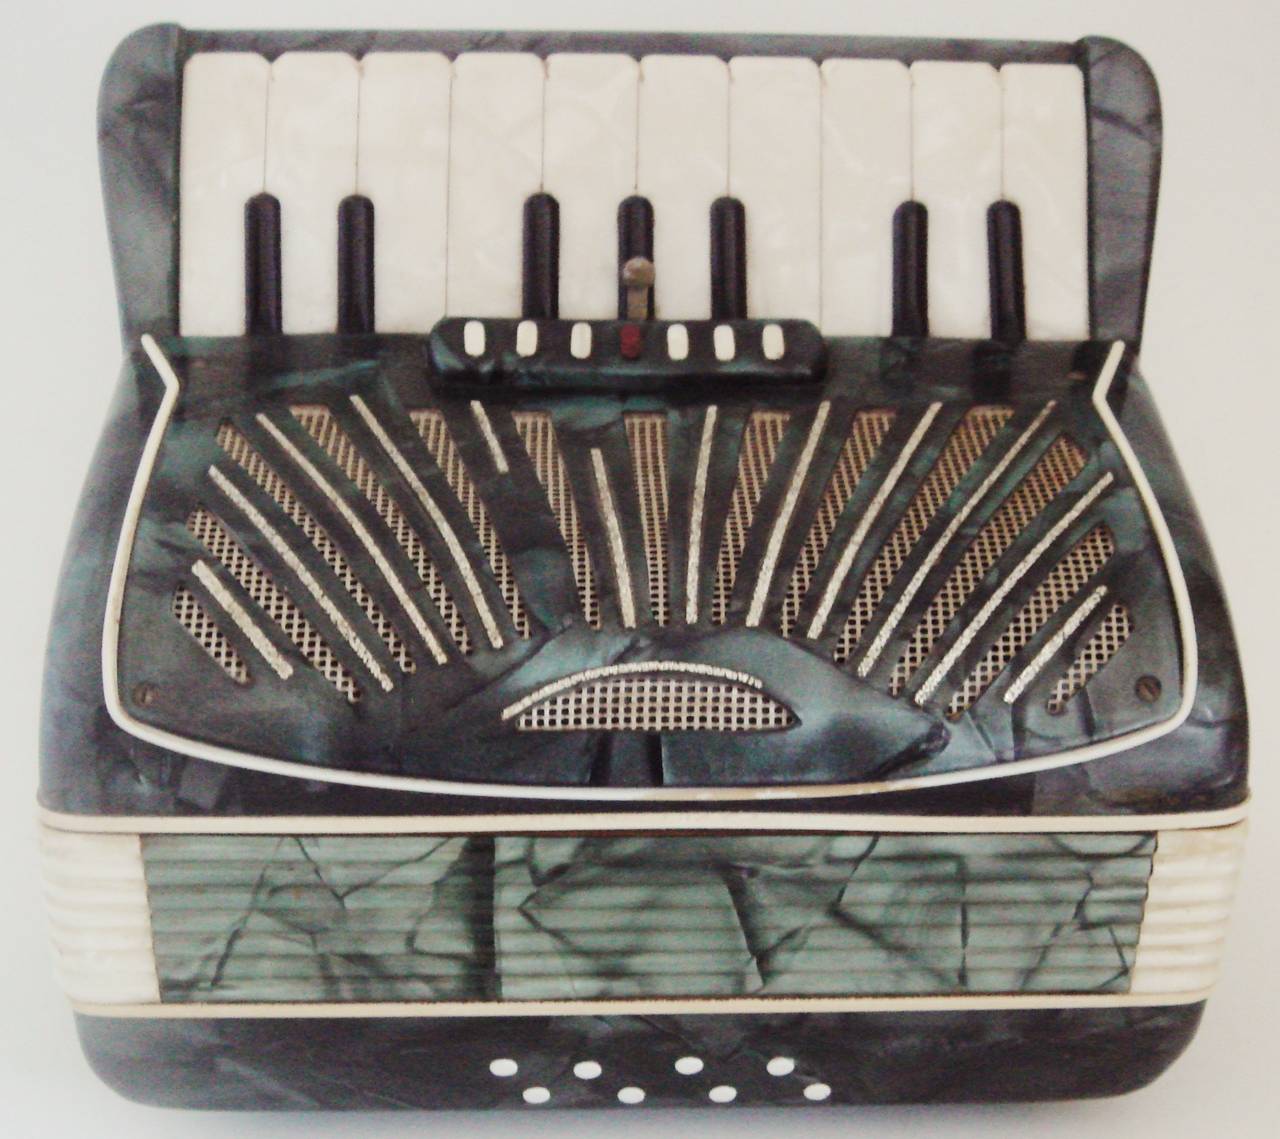 These beautiful Italian Art Deco miniature accordion shaped musical/cigarette boxes open to reveal three tiers of telescoping channels designed to hold thirty cigarettes. Their interiors are in blonde highly varnished wood with mechanical pieces